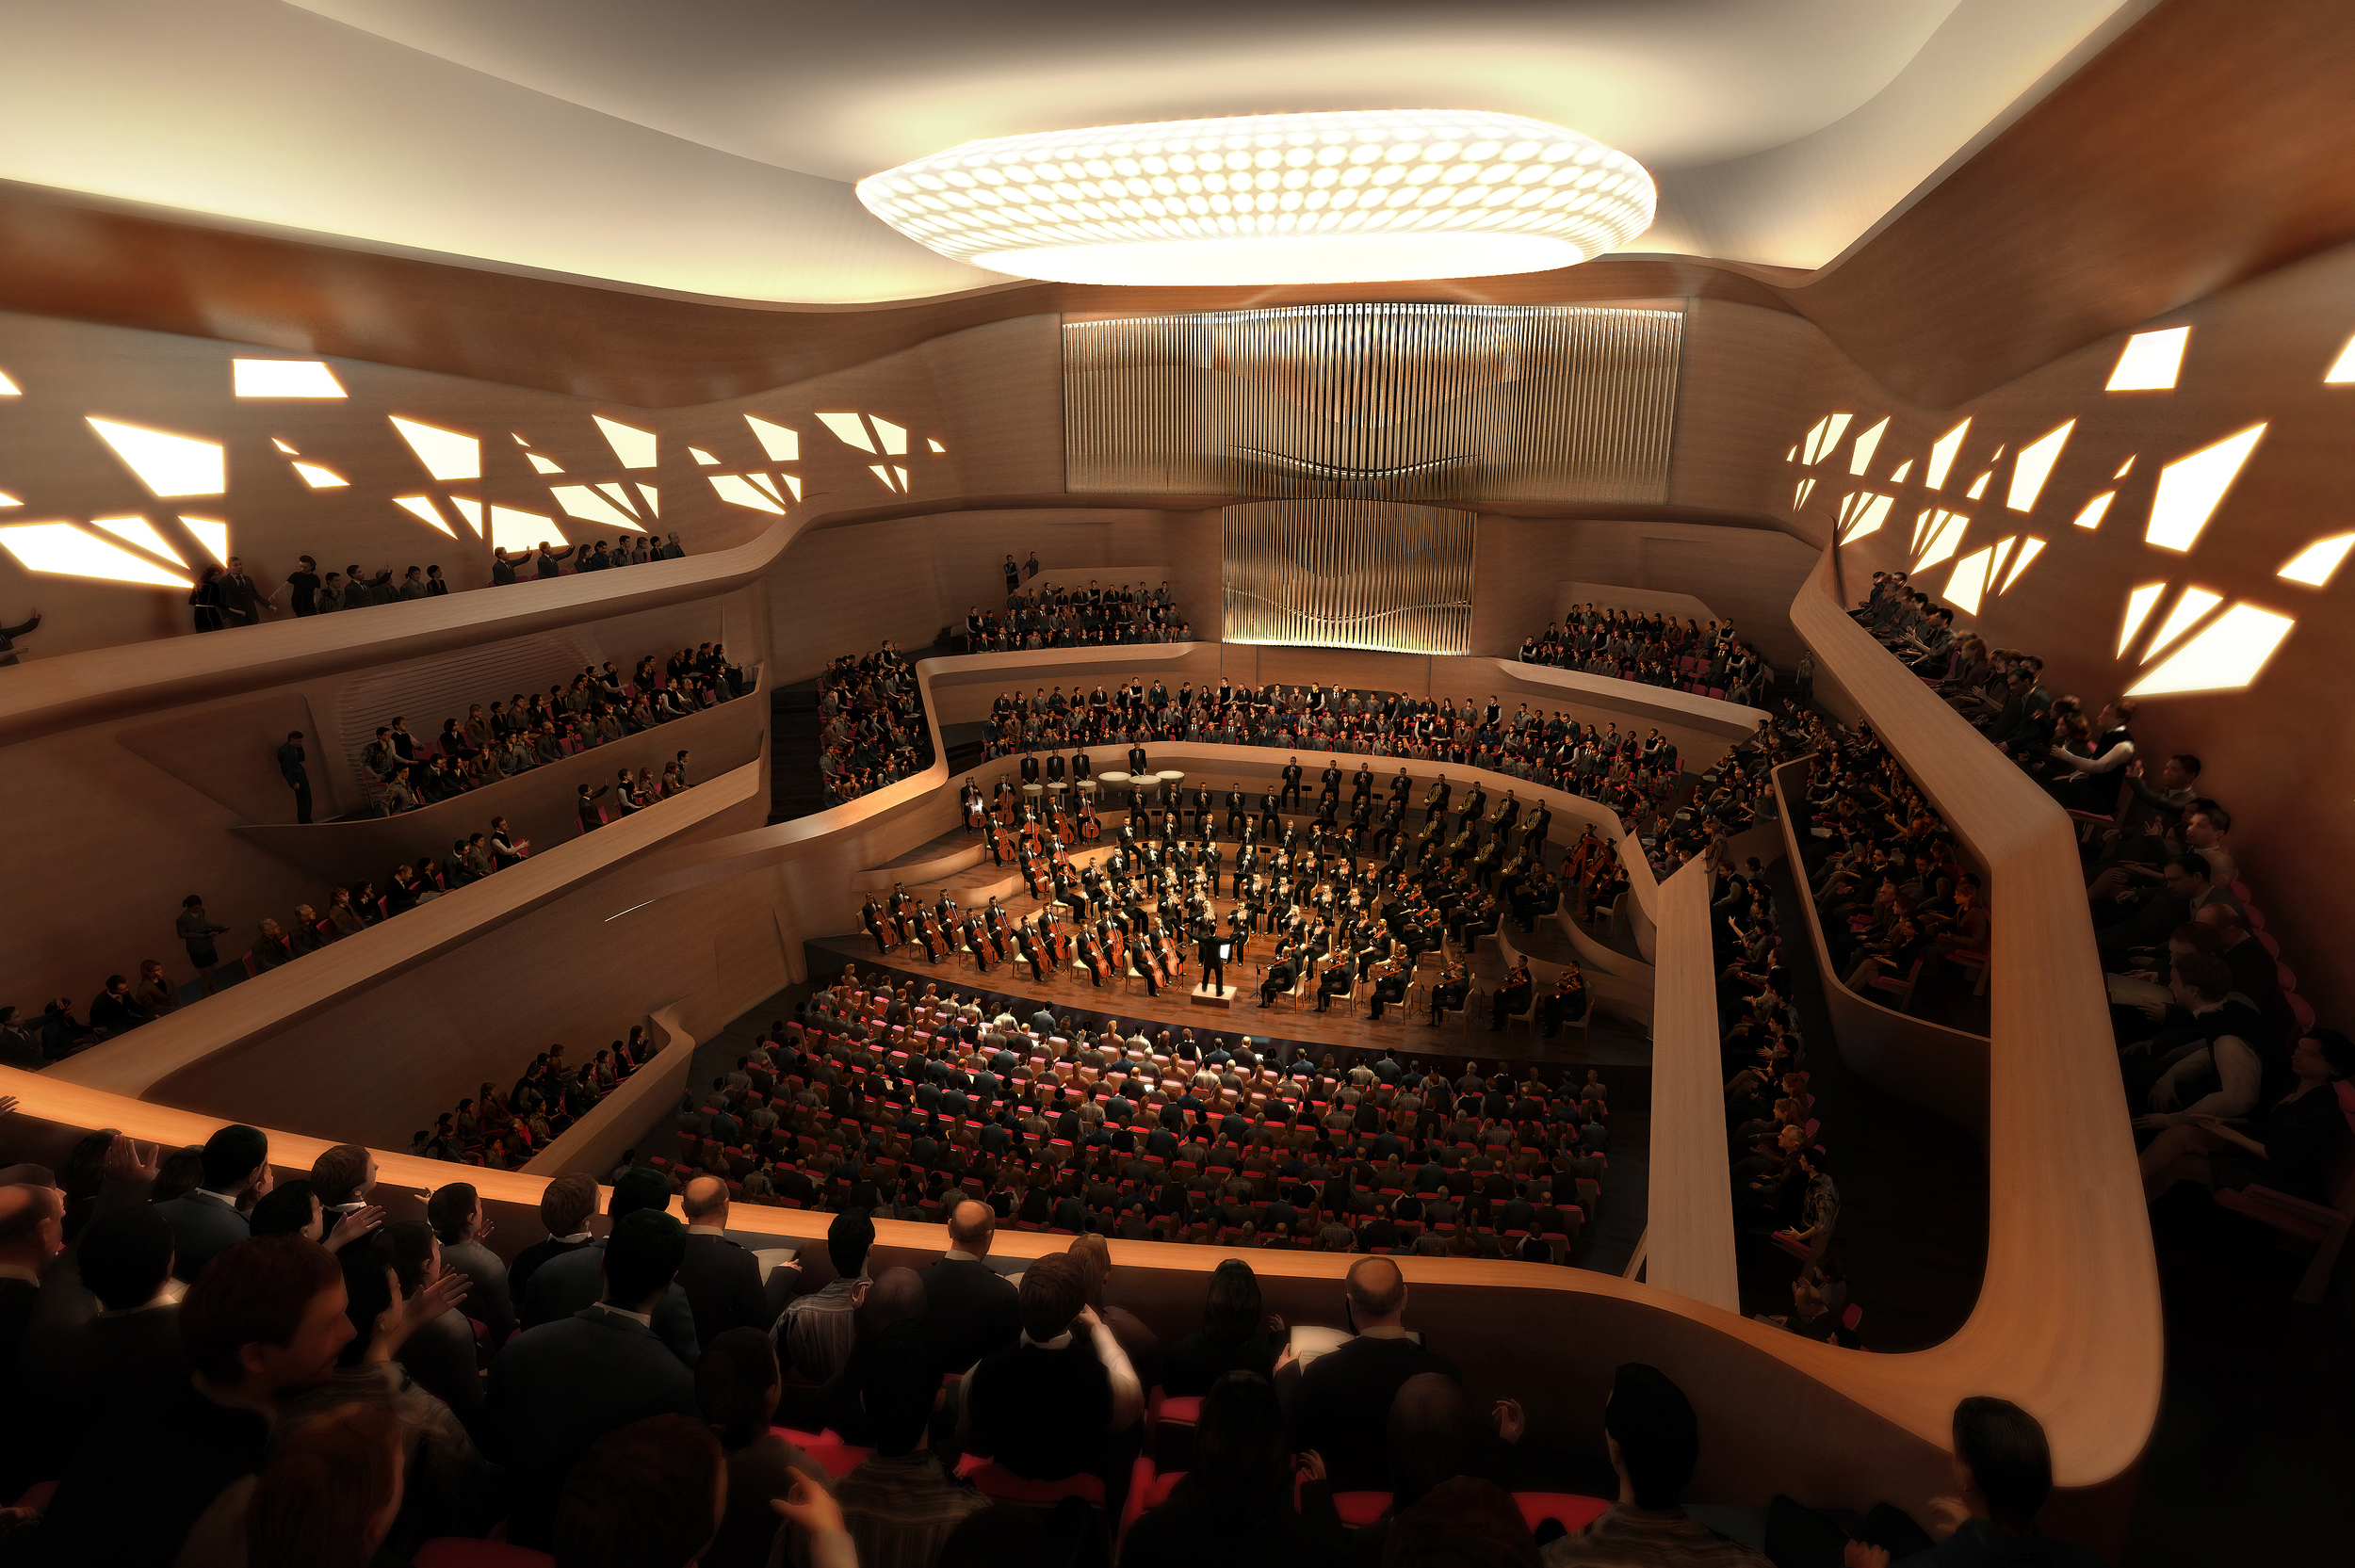 mth_zh_beethoven hall_ba_view05a_a02.jpg